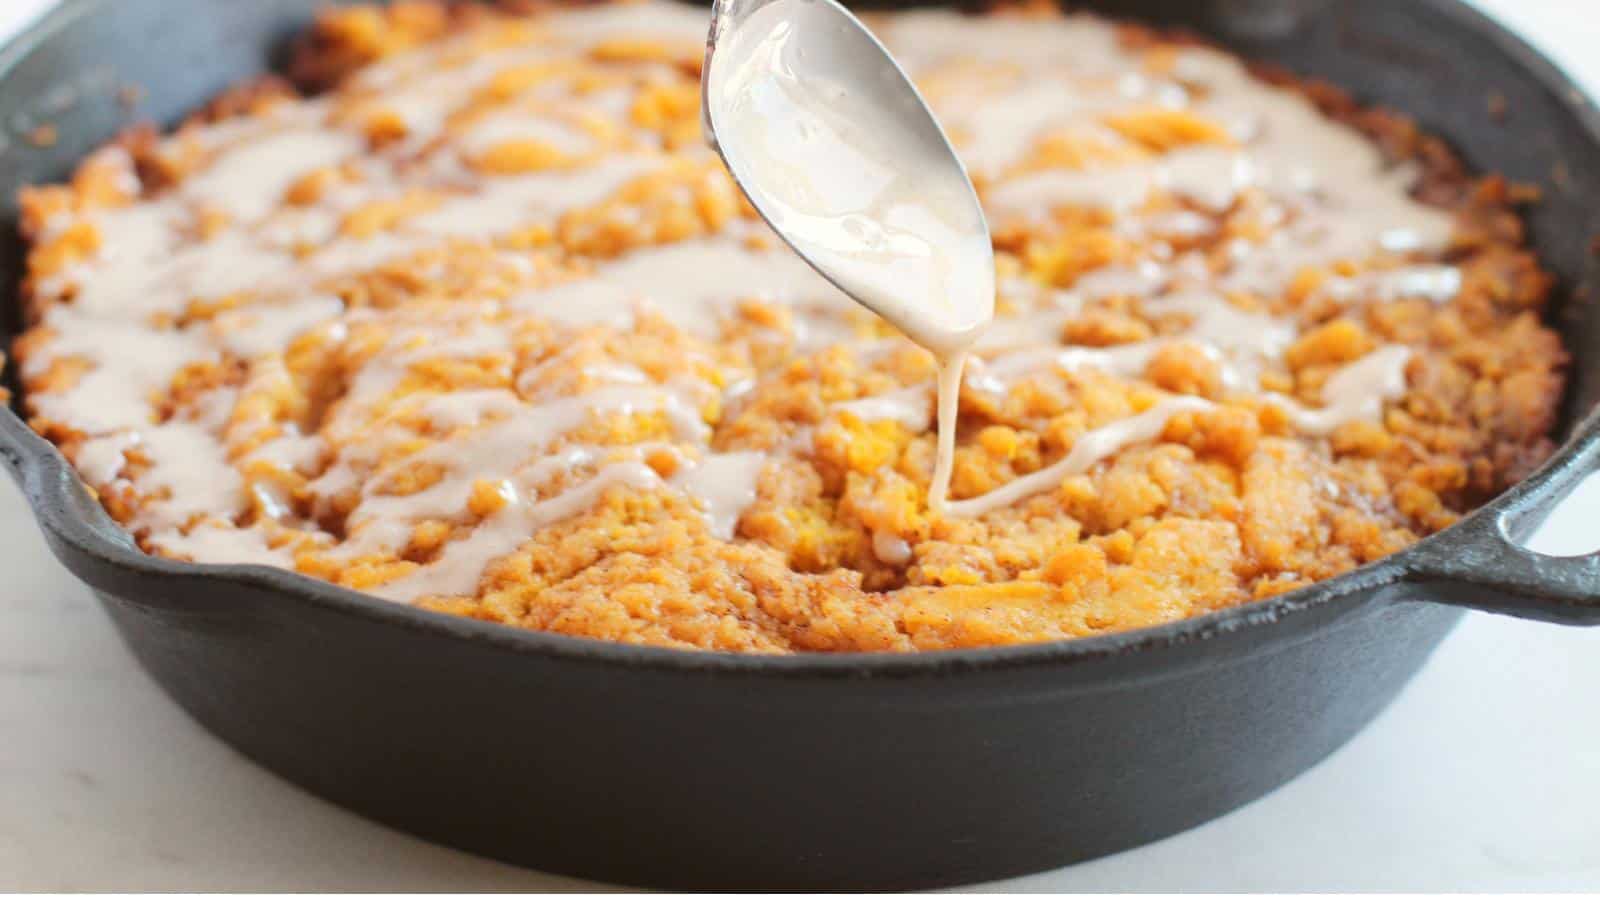 Cinnamon roll pumpkin skillet cake with icing drizzled from spoon.